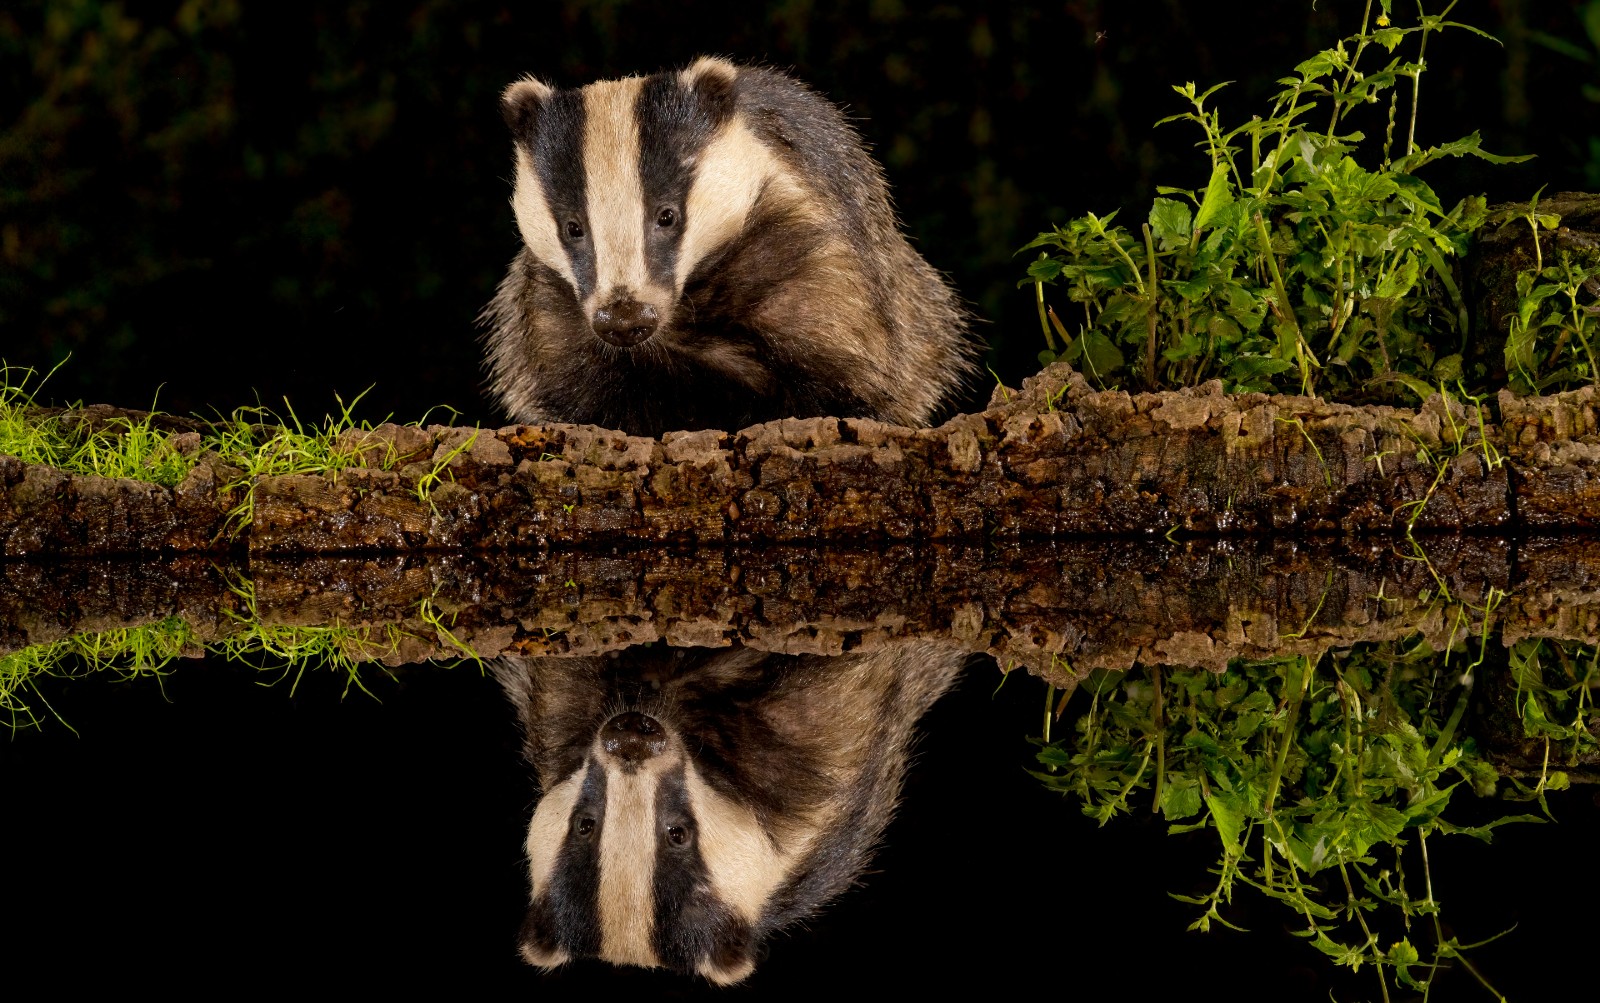 A photo of a badger peering into a stream with a clear reflection in the water.